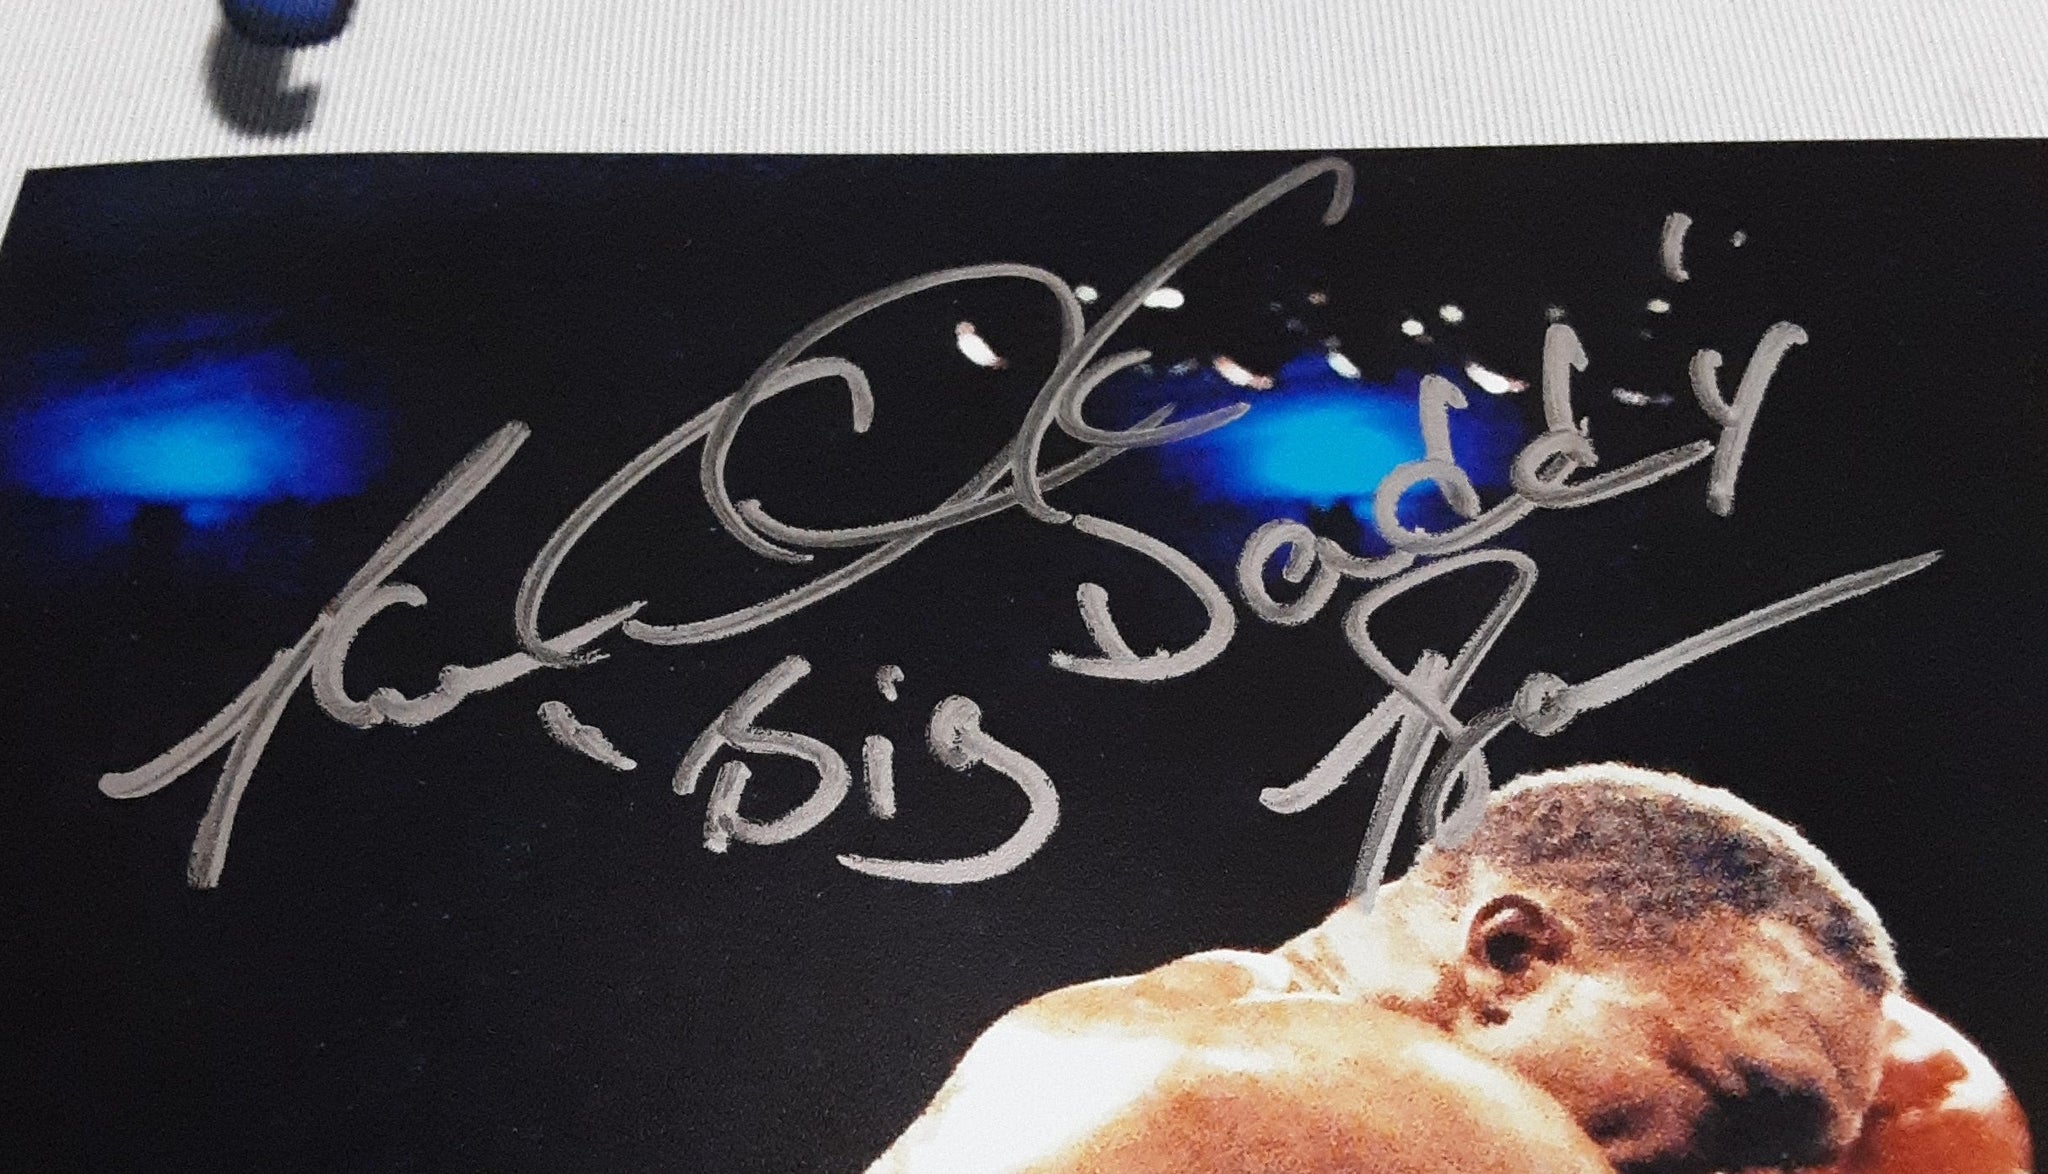 Riddick Bowe Authentic Signed 8x10 Photo Autographed with Inscription JSA.